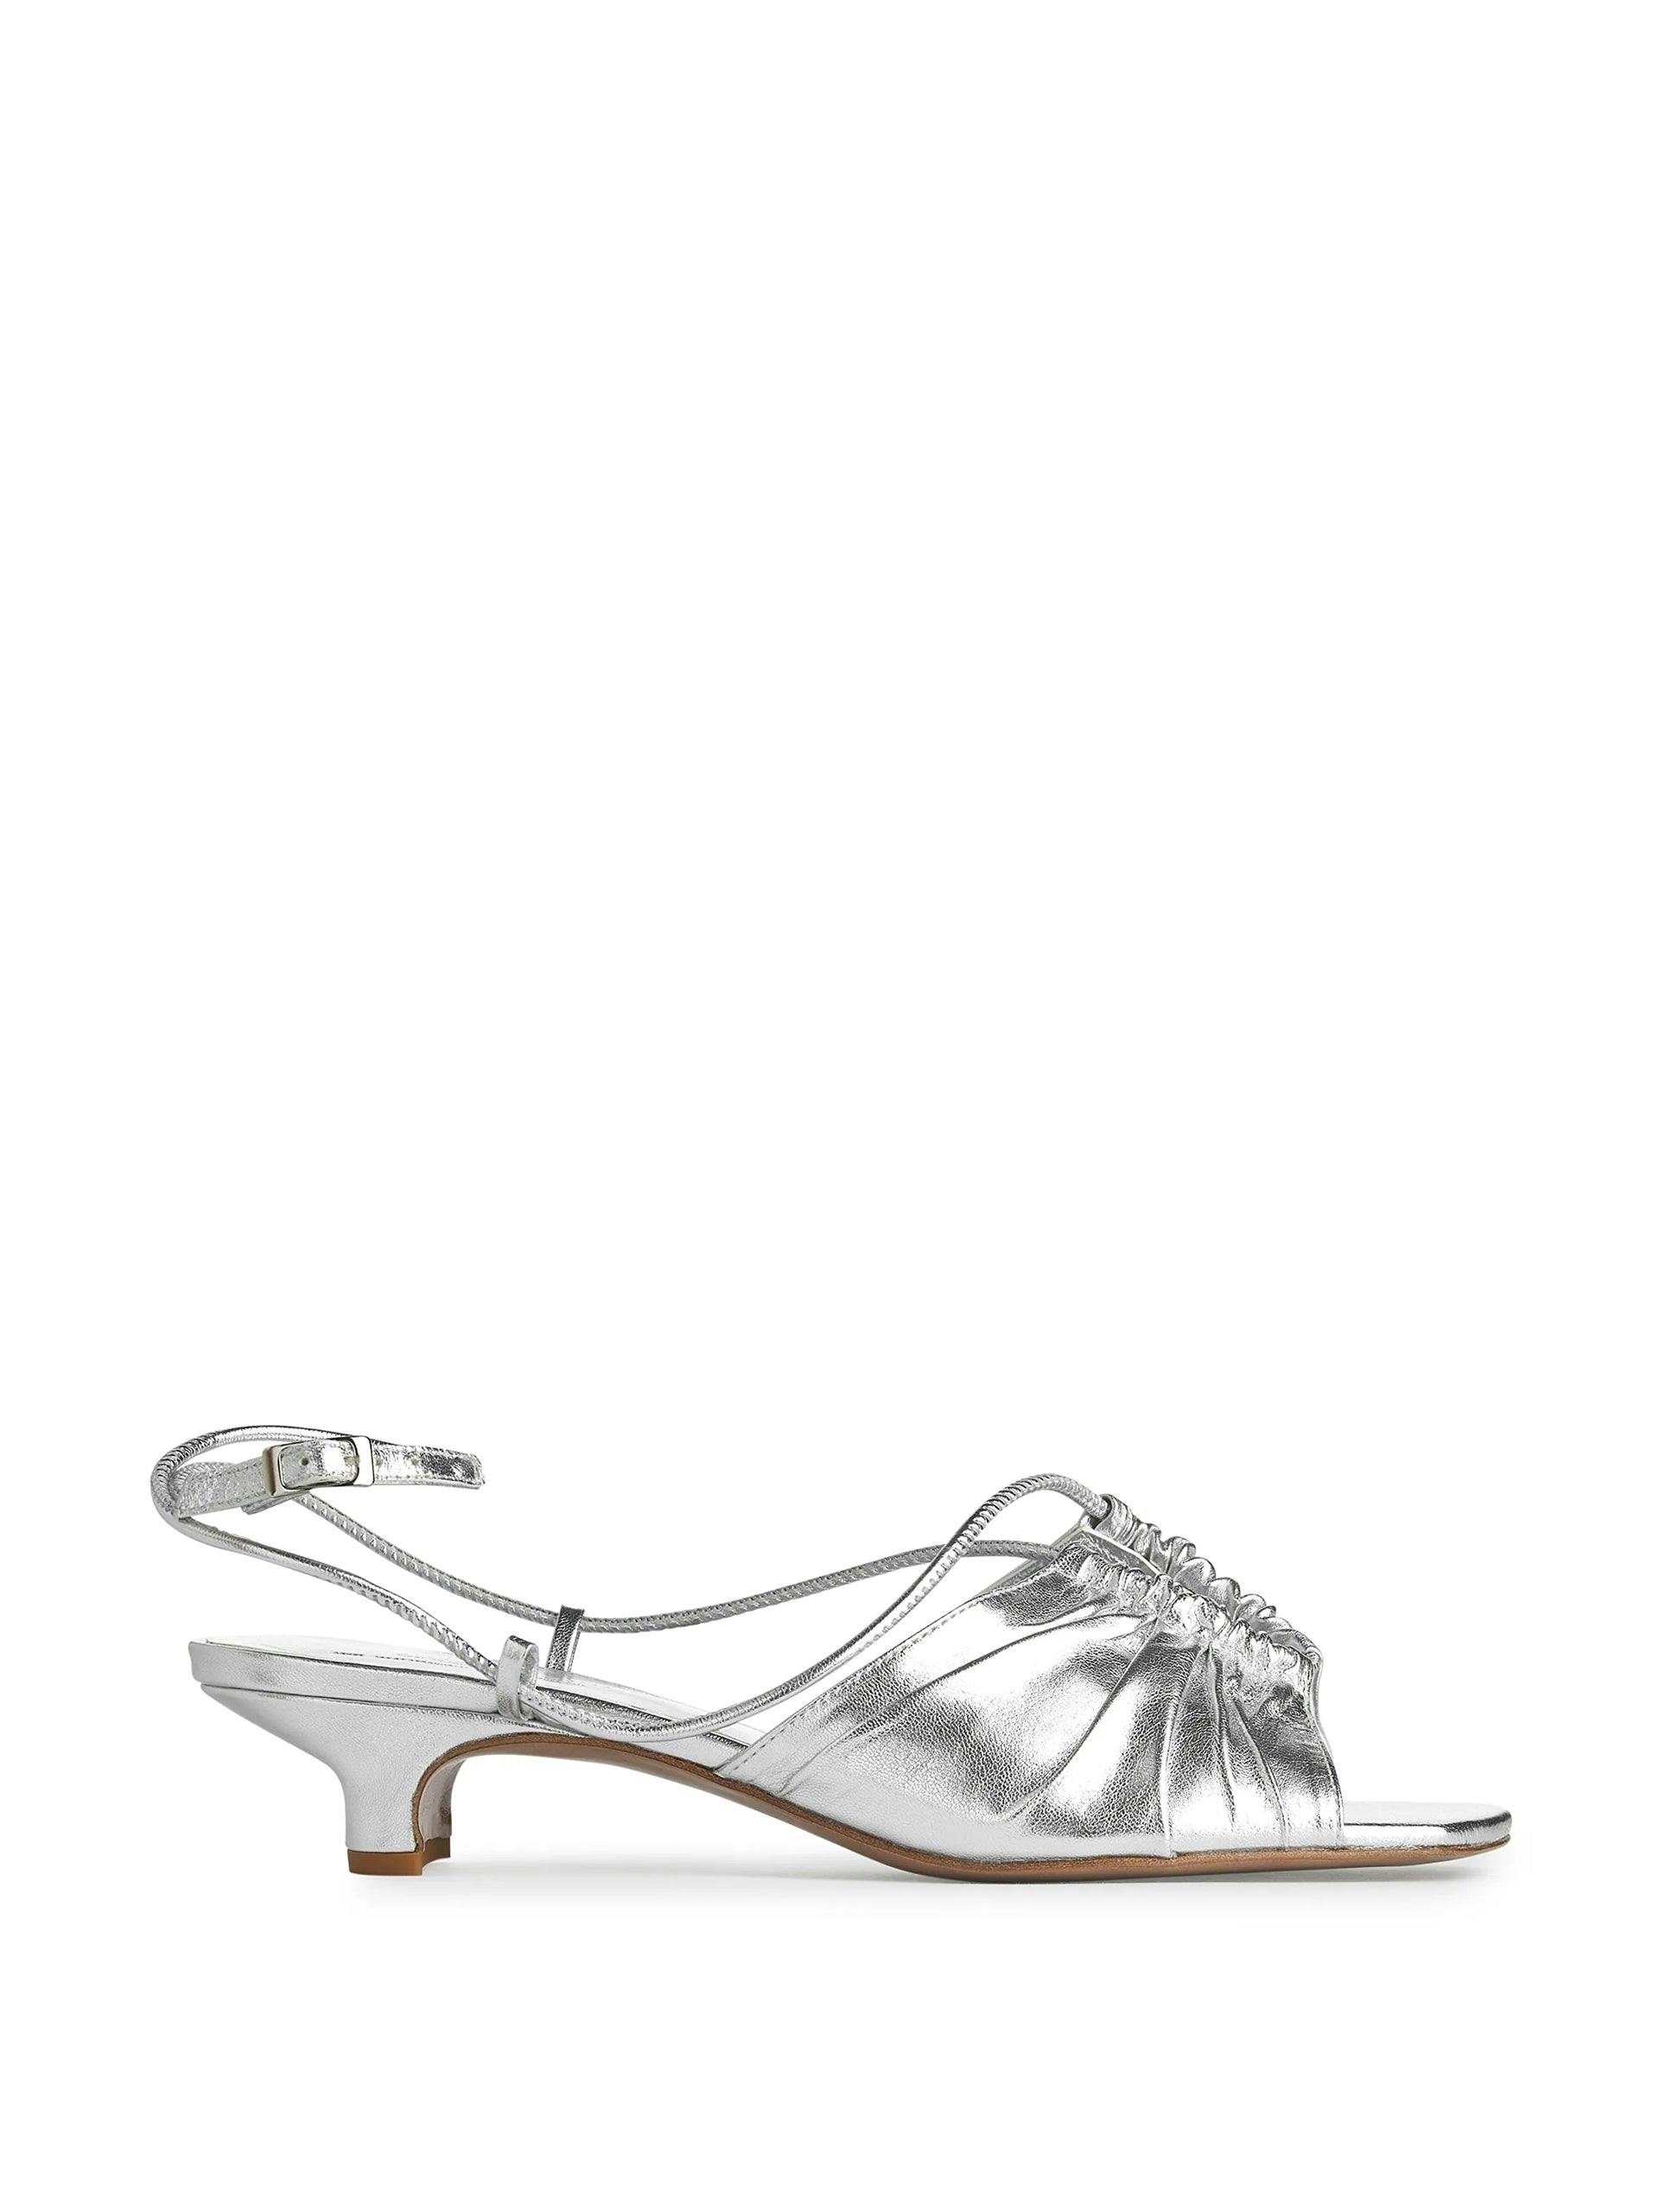 Square-toe silver leather sandals